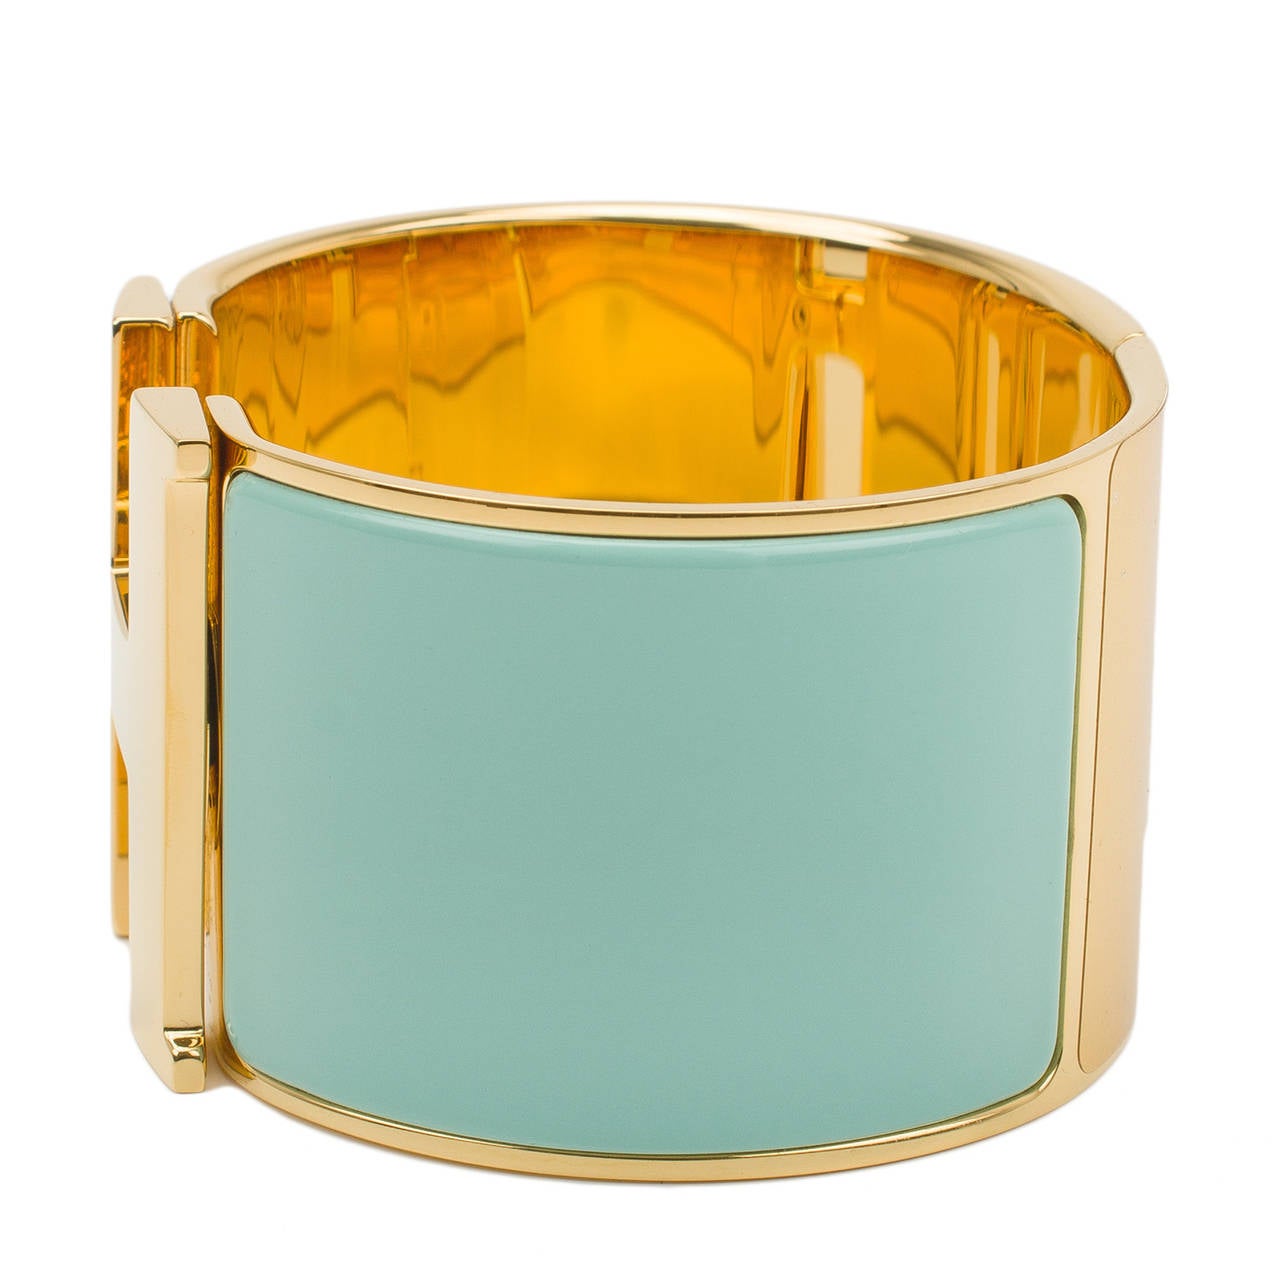 Hermes extra wide Clic Clac H bracelet in Lagoon (pastel bluish-green) enamel with gold plated hardware in size PM.

Condition: Pristine; store fresh condition

Accompanied by: Hermes box, dustbag and carebook

Measurements: Diameter: 2.25